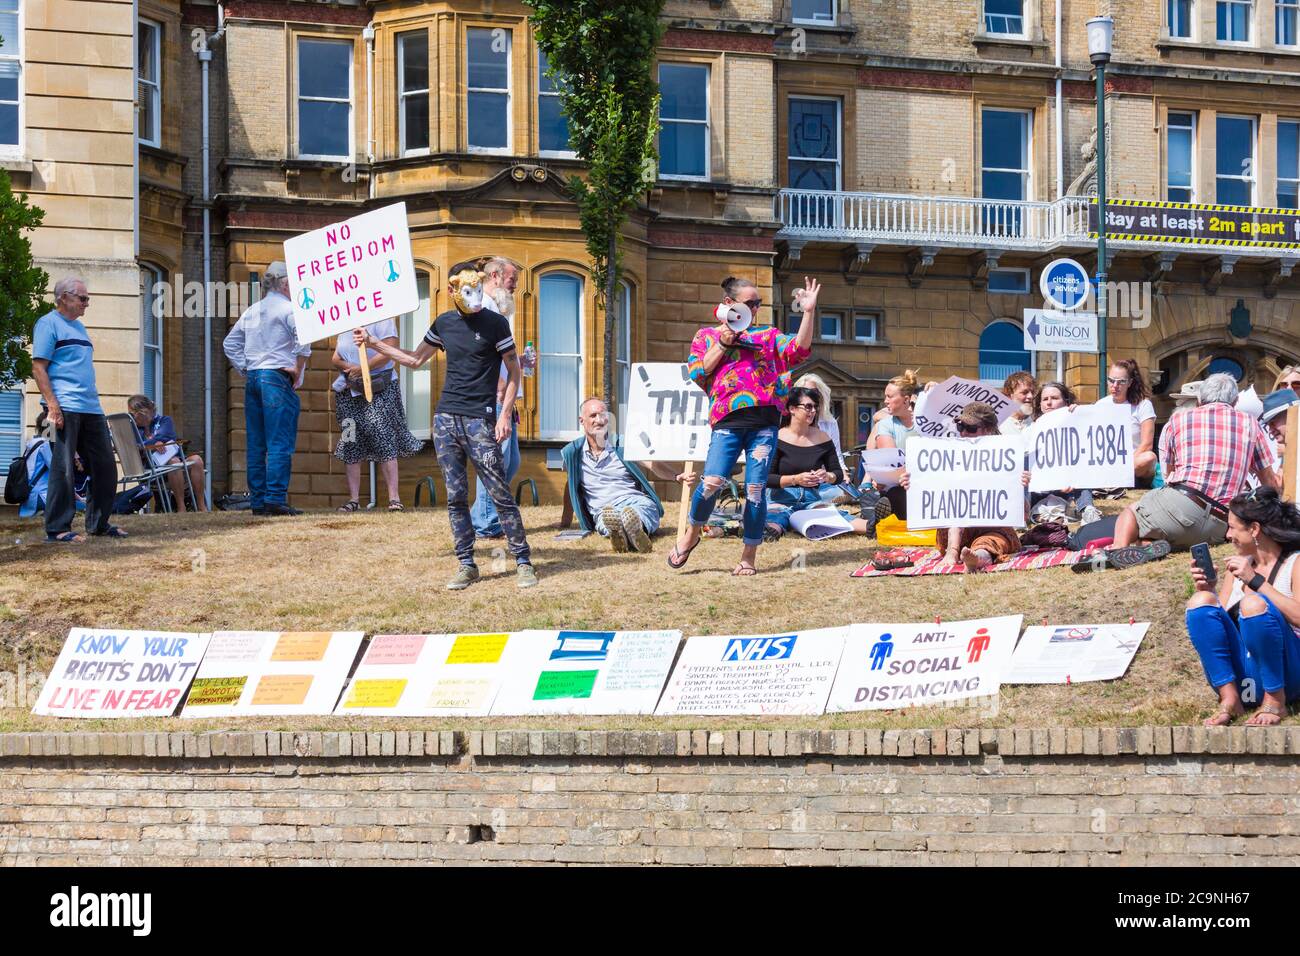 Bournemouth, Dorset UK. 1st August 2020. Group of people express their views outside Bournemouth Town Hall about the restrictions and guidance over Coronavirus Covid-19. Covid deniers. Credit: Carolyn Jenkins/Alamy Live News Stock Photo